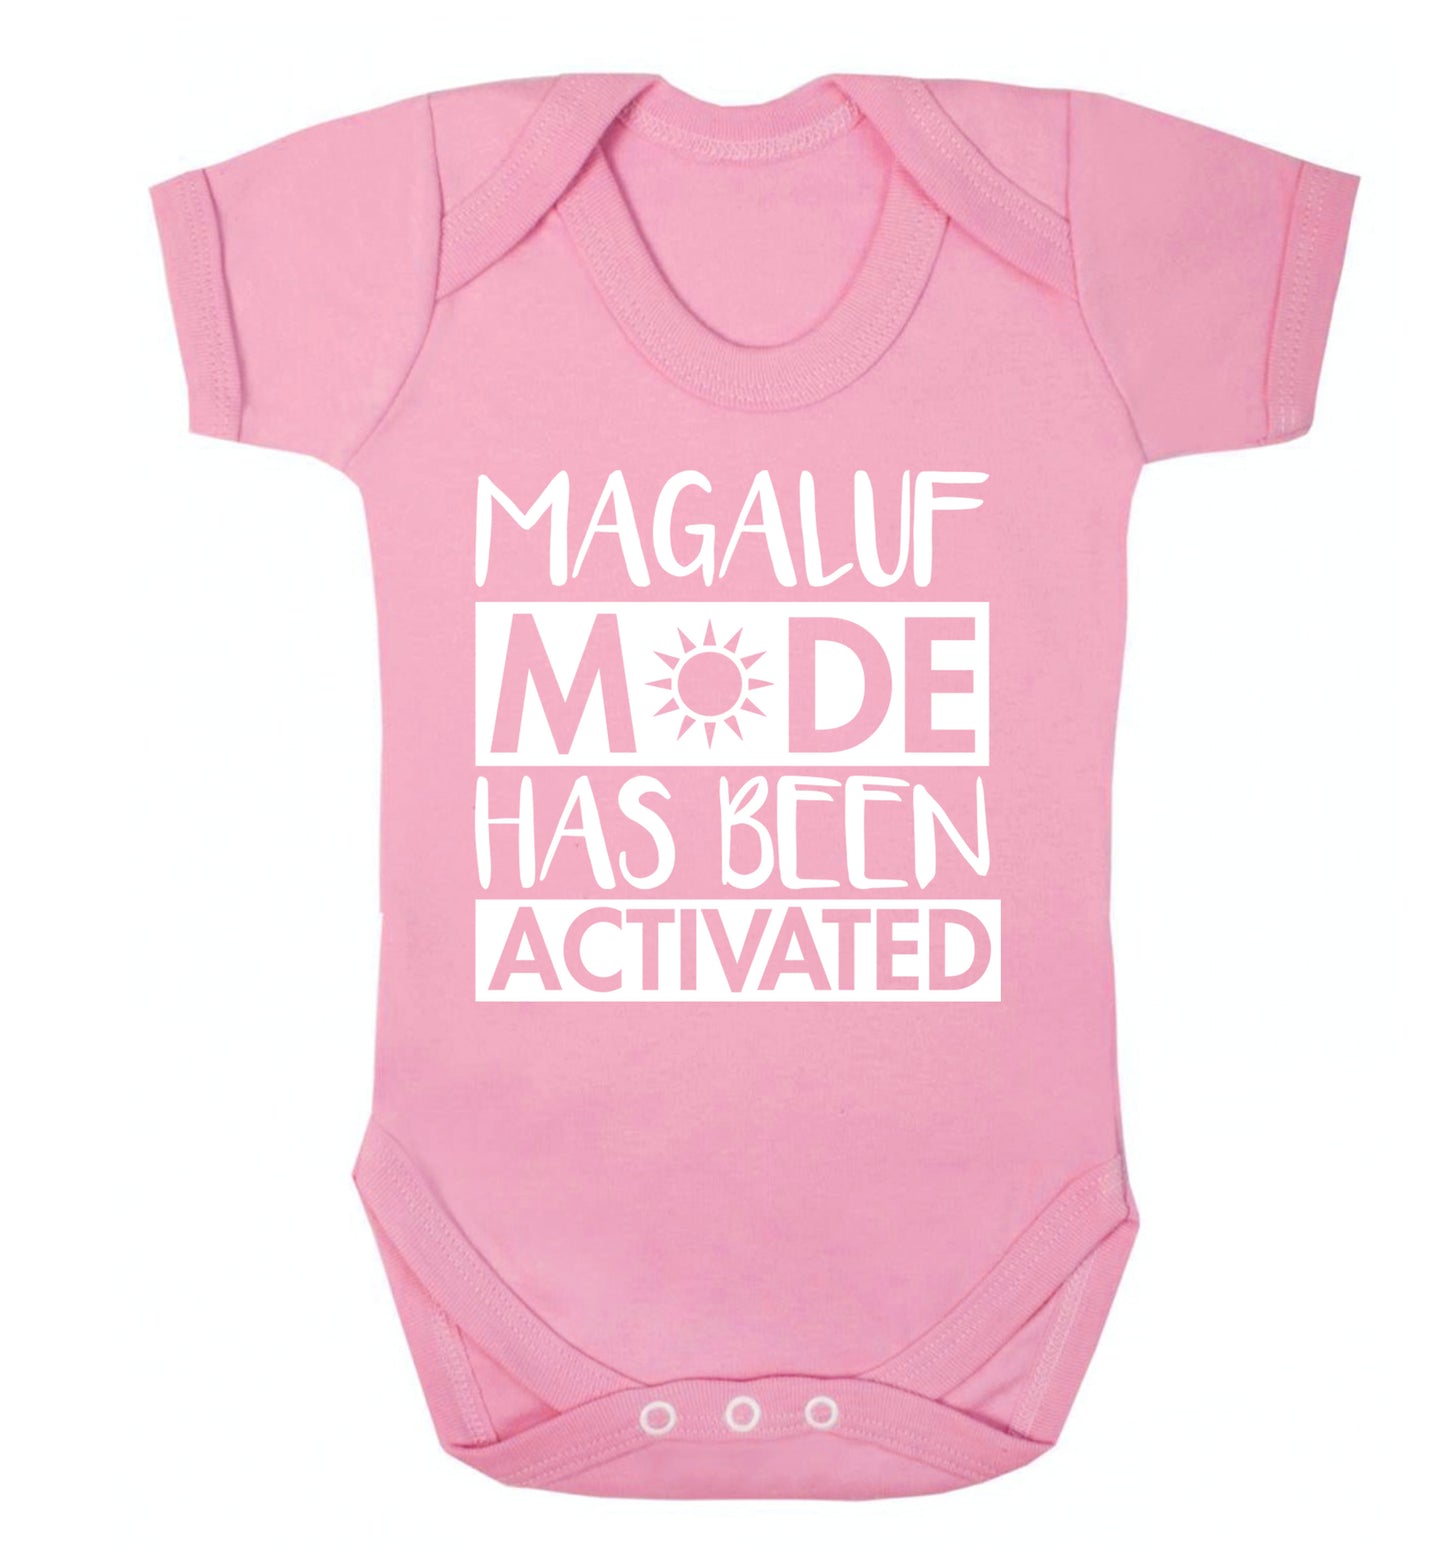 Magaluf mode has been activated Baby Vest pale pink 18-24 months